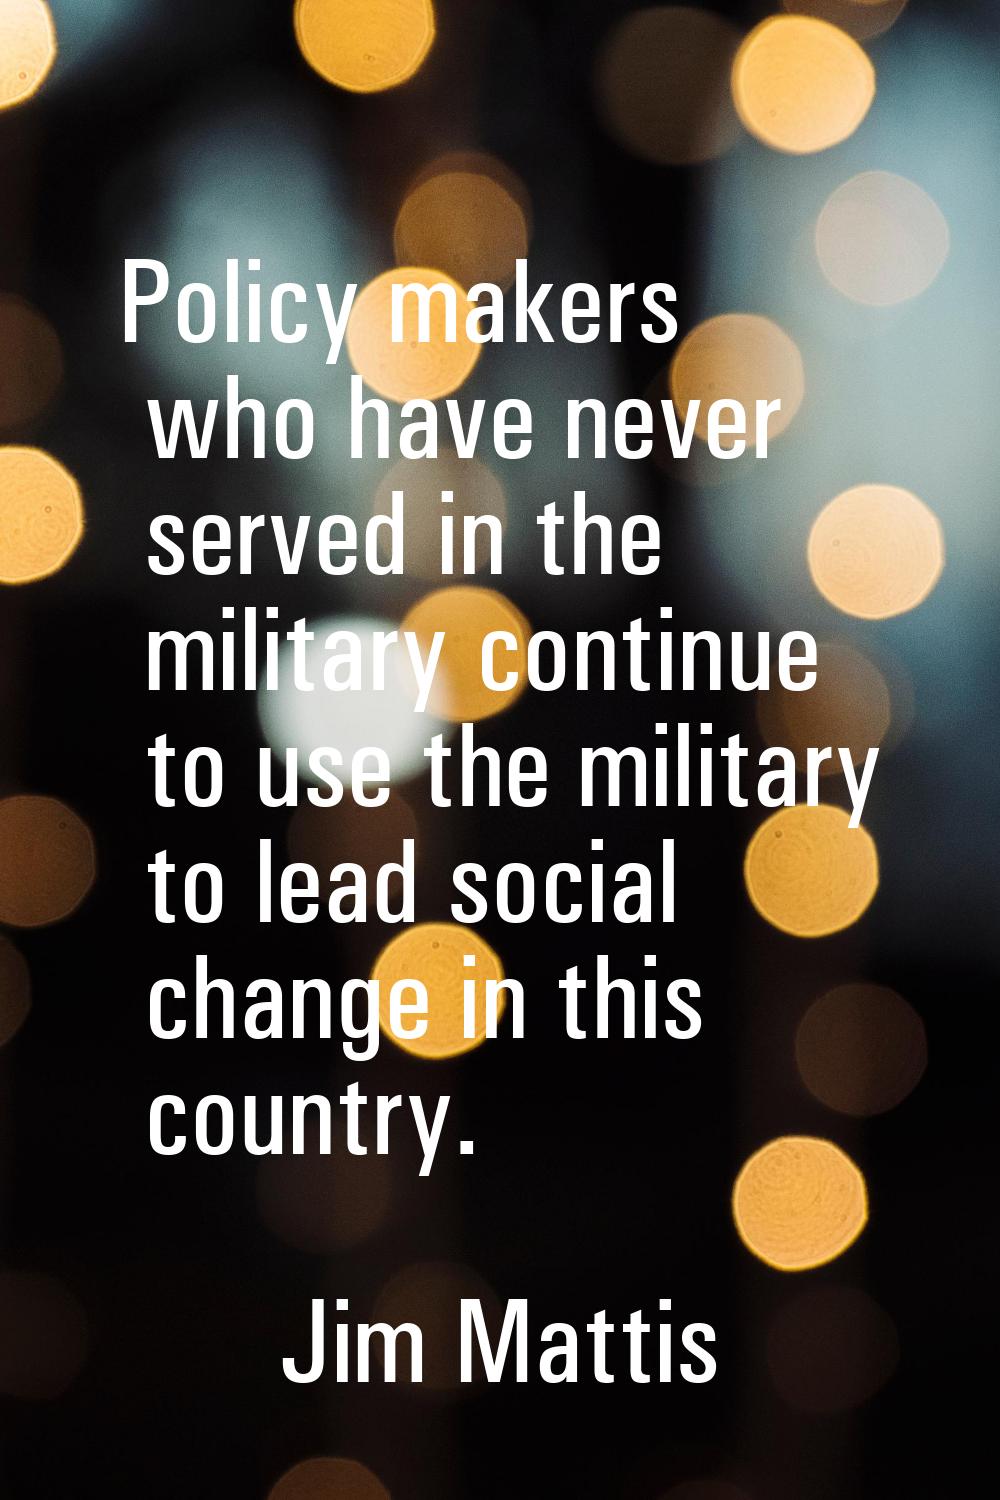 Policy makers who have never served in the military continue to use the military to lead social cha